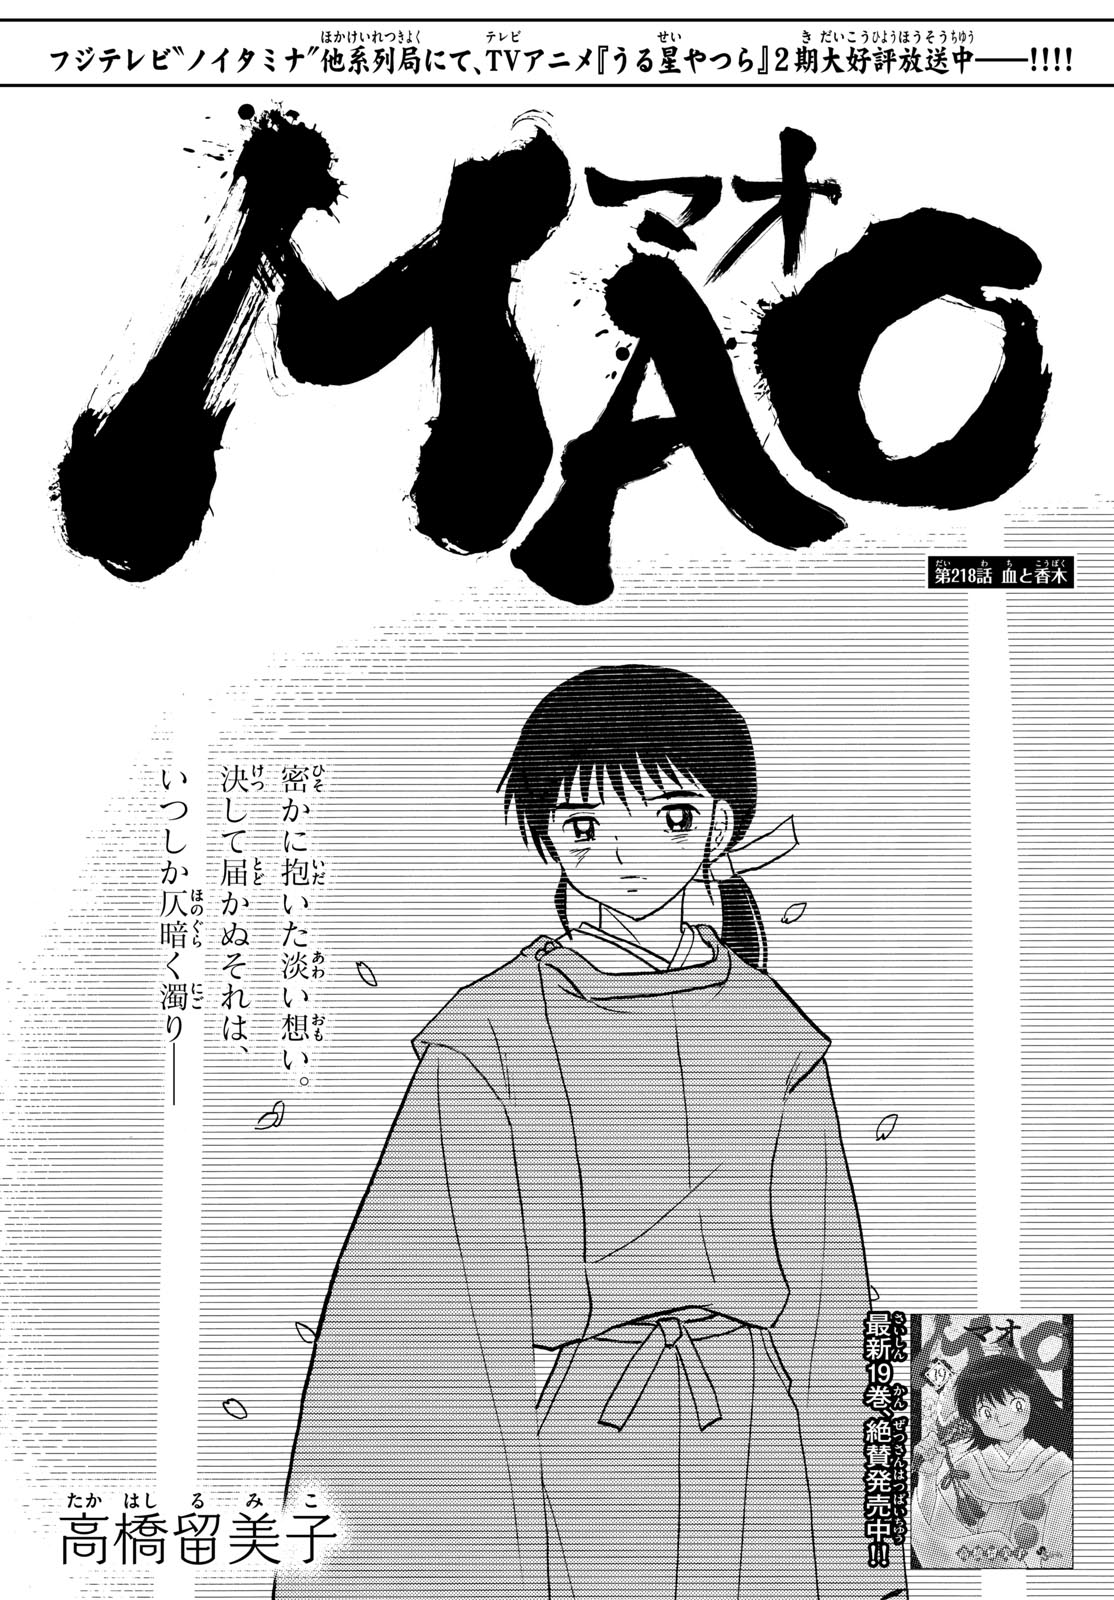 MAO - Chapter 218 - Page 1